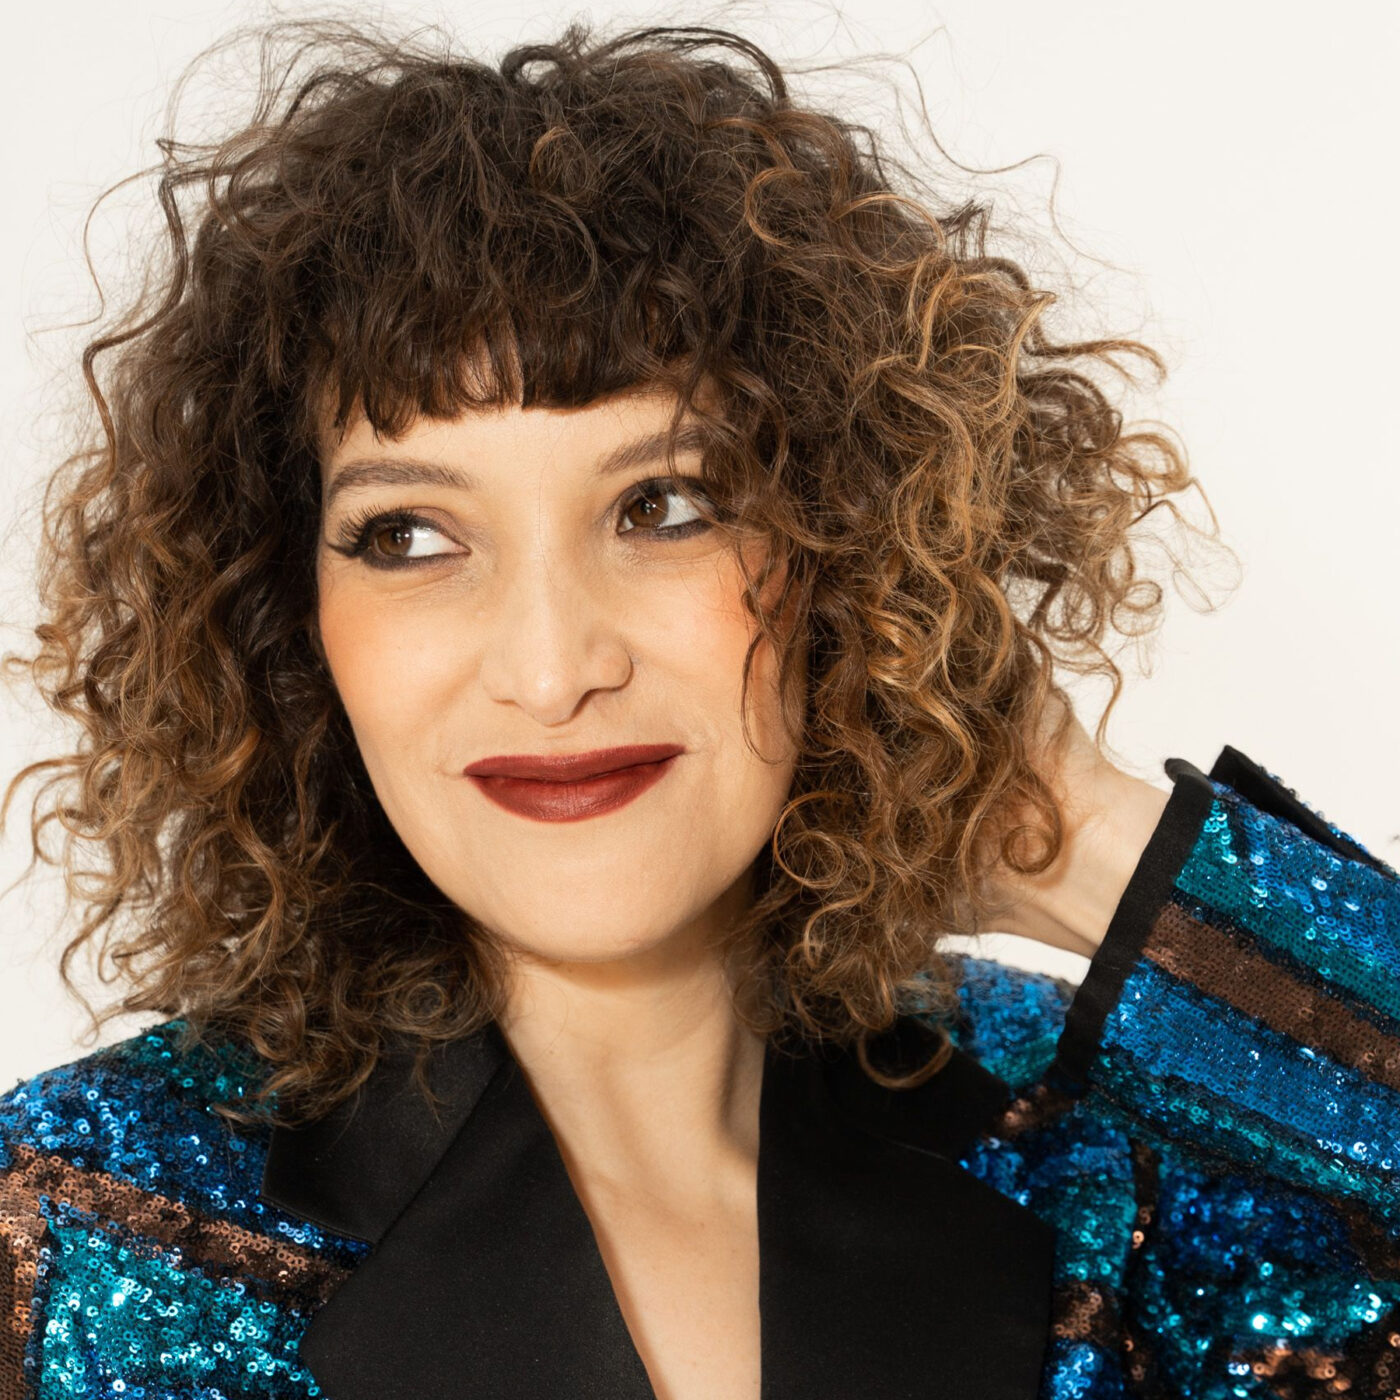 Interview Gaby Moreno Talks New Acoustic Ep And Friendship With Oscar Isaac 